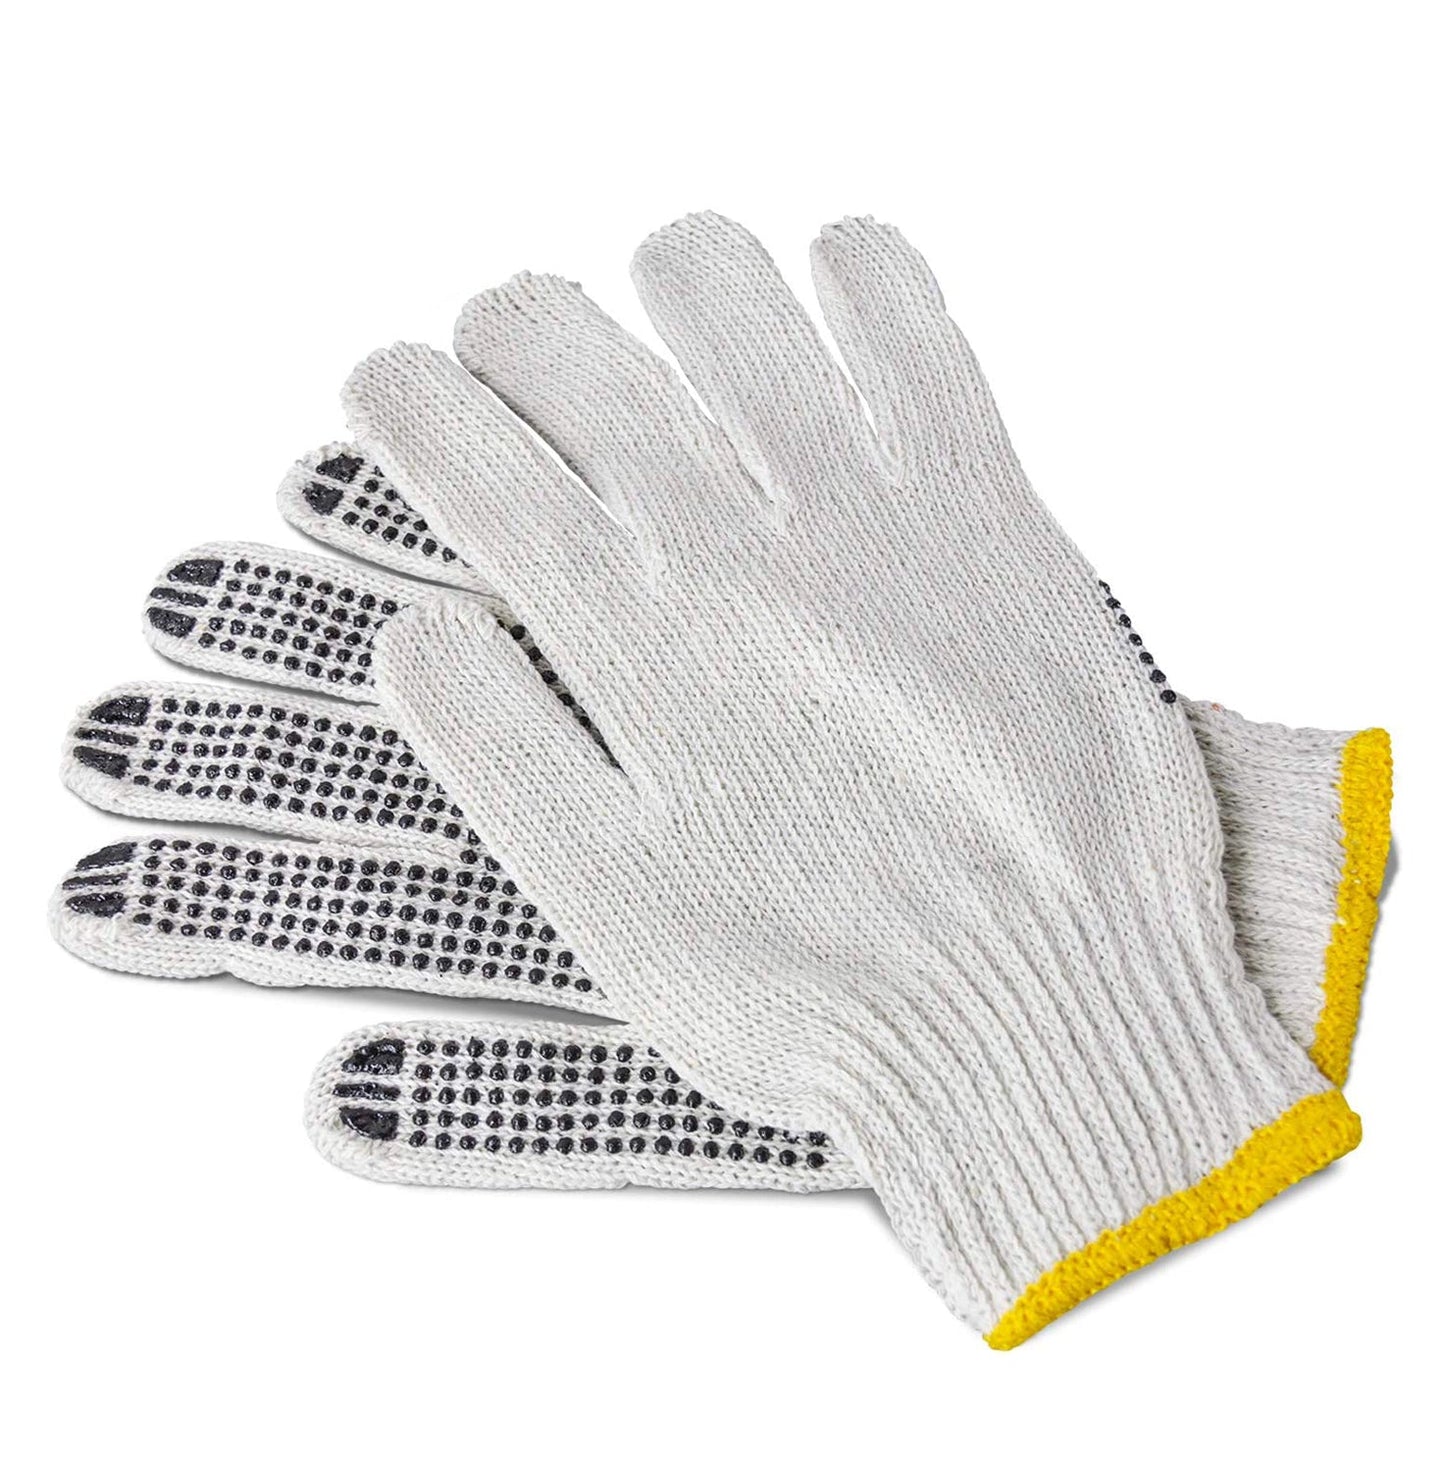 4611 Unisex Knitted/Sewing Cotton Plain Hand Gloves Raw White DeoDap